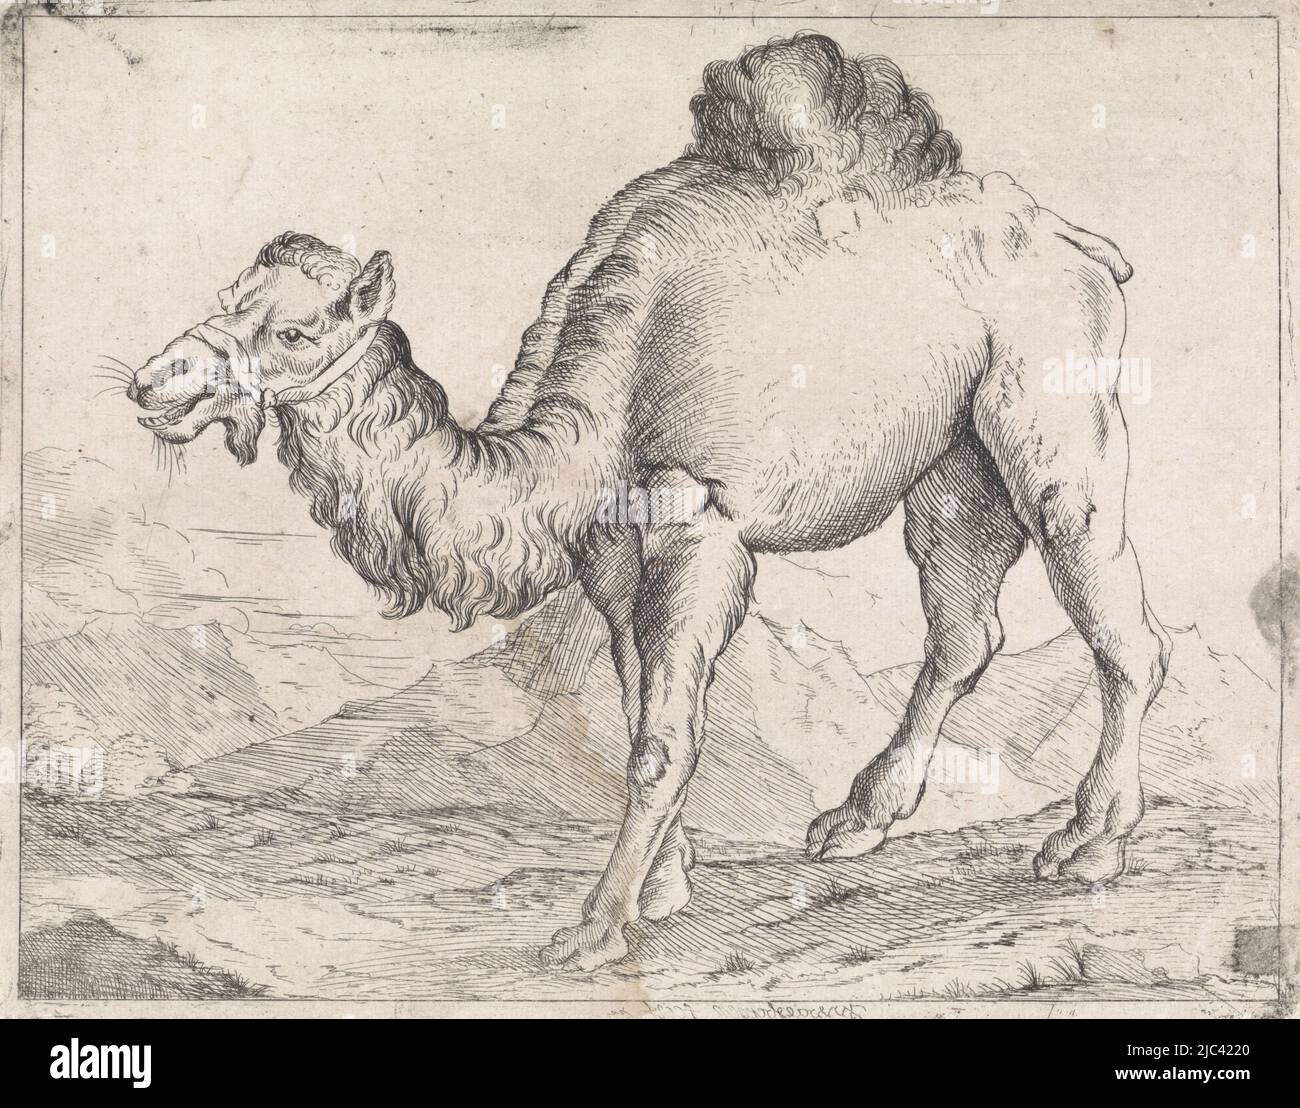 Landscape with a dromedary, print maker: Isaac van Waesberge, (mentioned on object), The Hague, 1643 - 1657, paper, etching, h 154 mm × w 195 mm Stock Photo